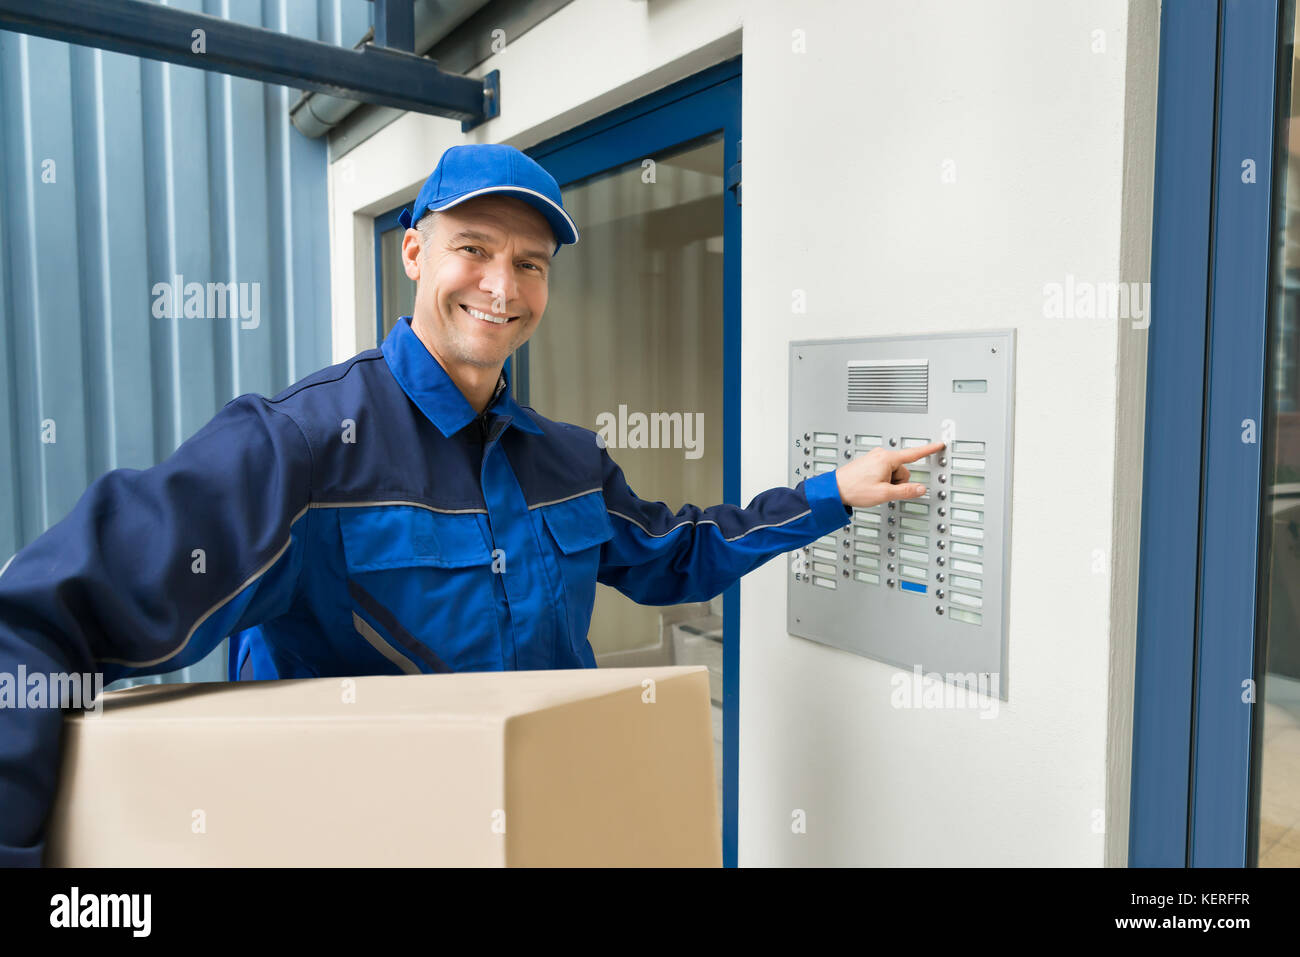 Delivery Man With Cardboard Box Pressing Button Of Intercom To Enter Building Stock Photo